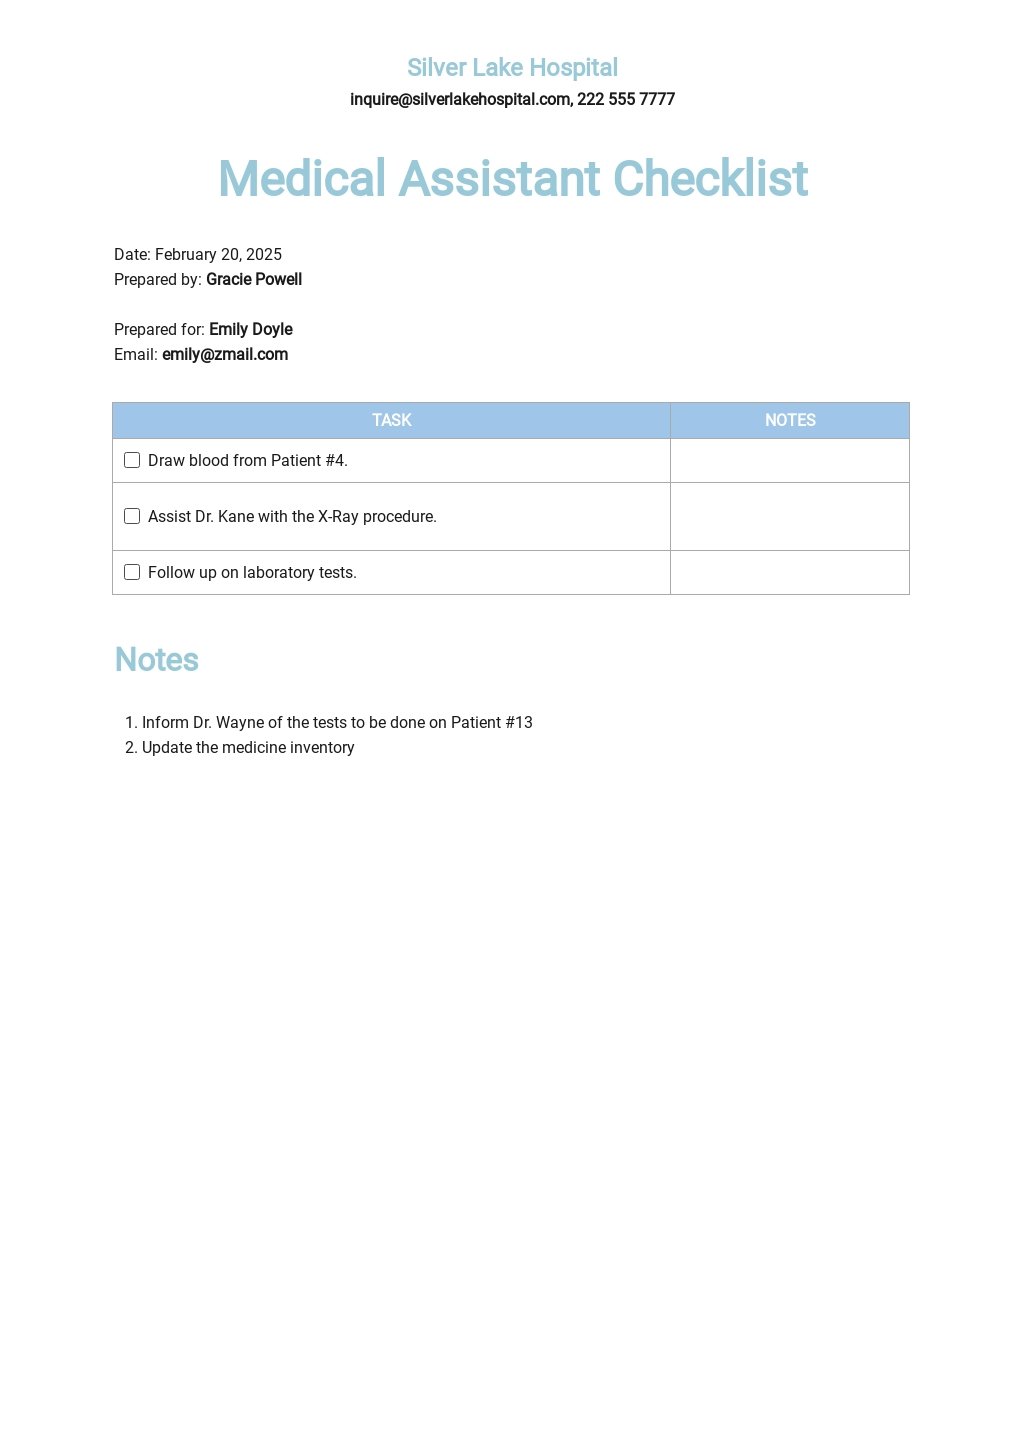 Medical Assistant Checklist Template.jpe